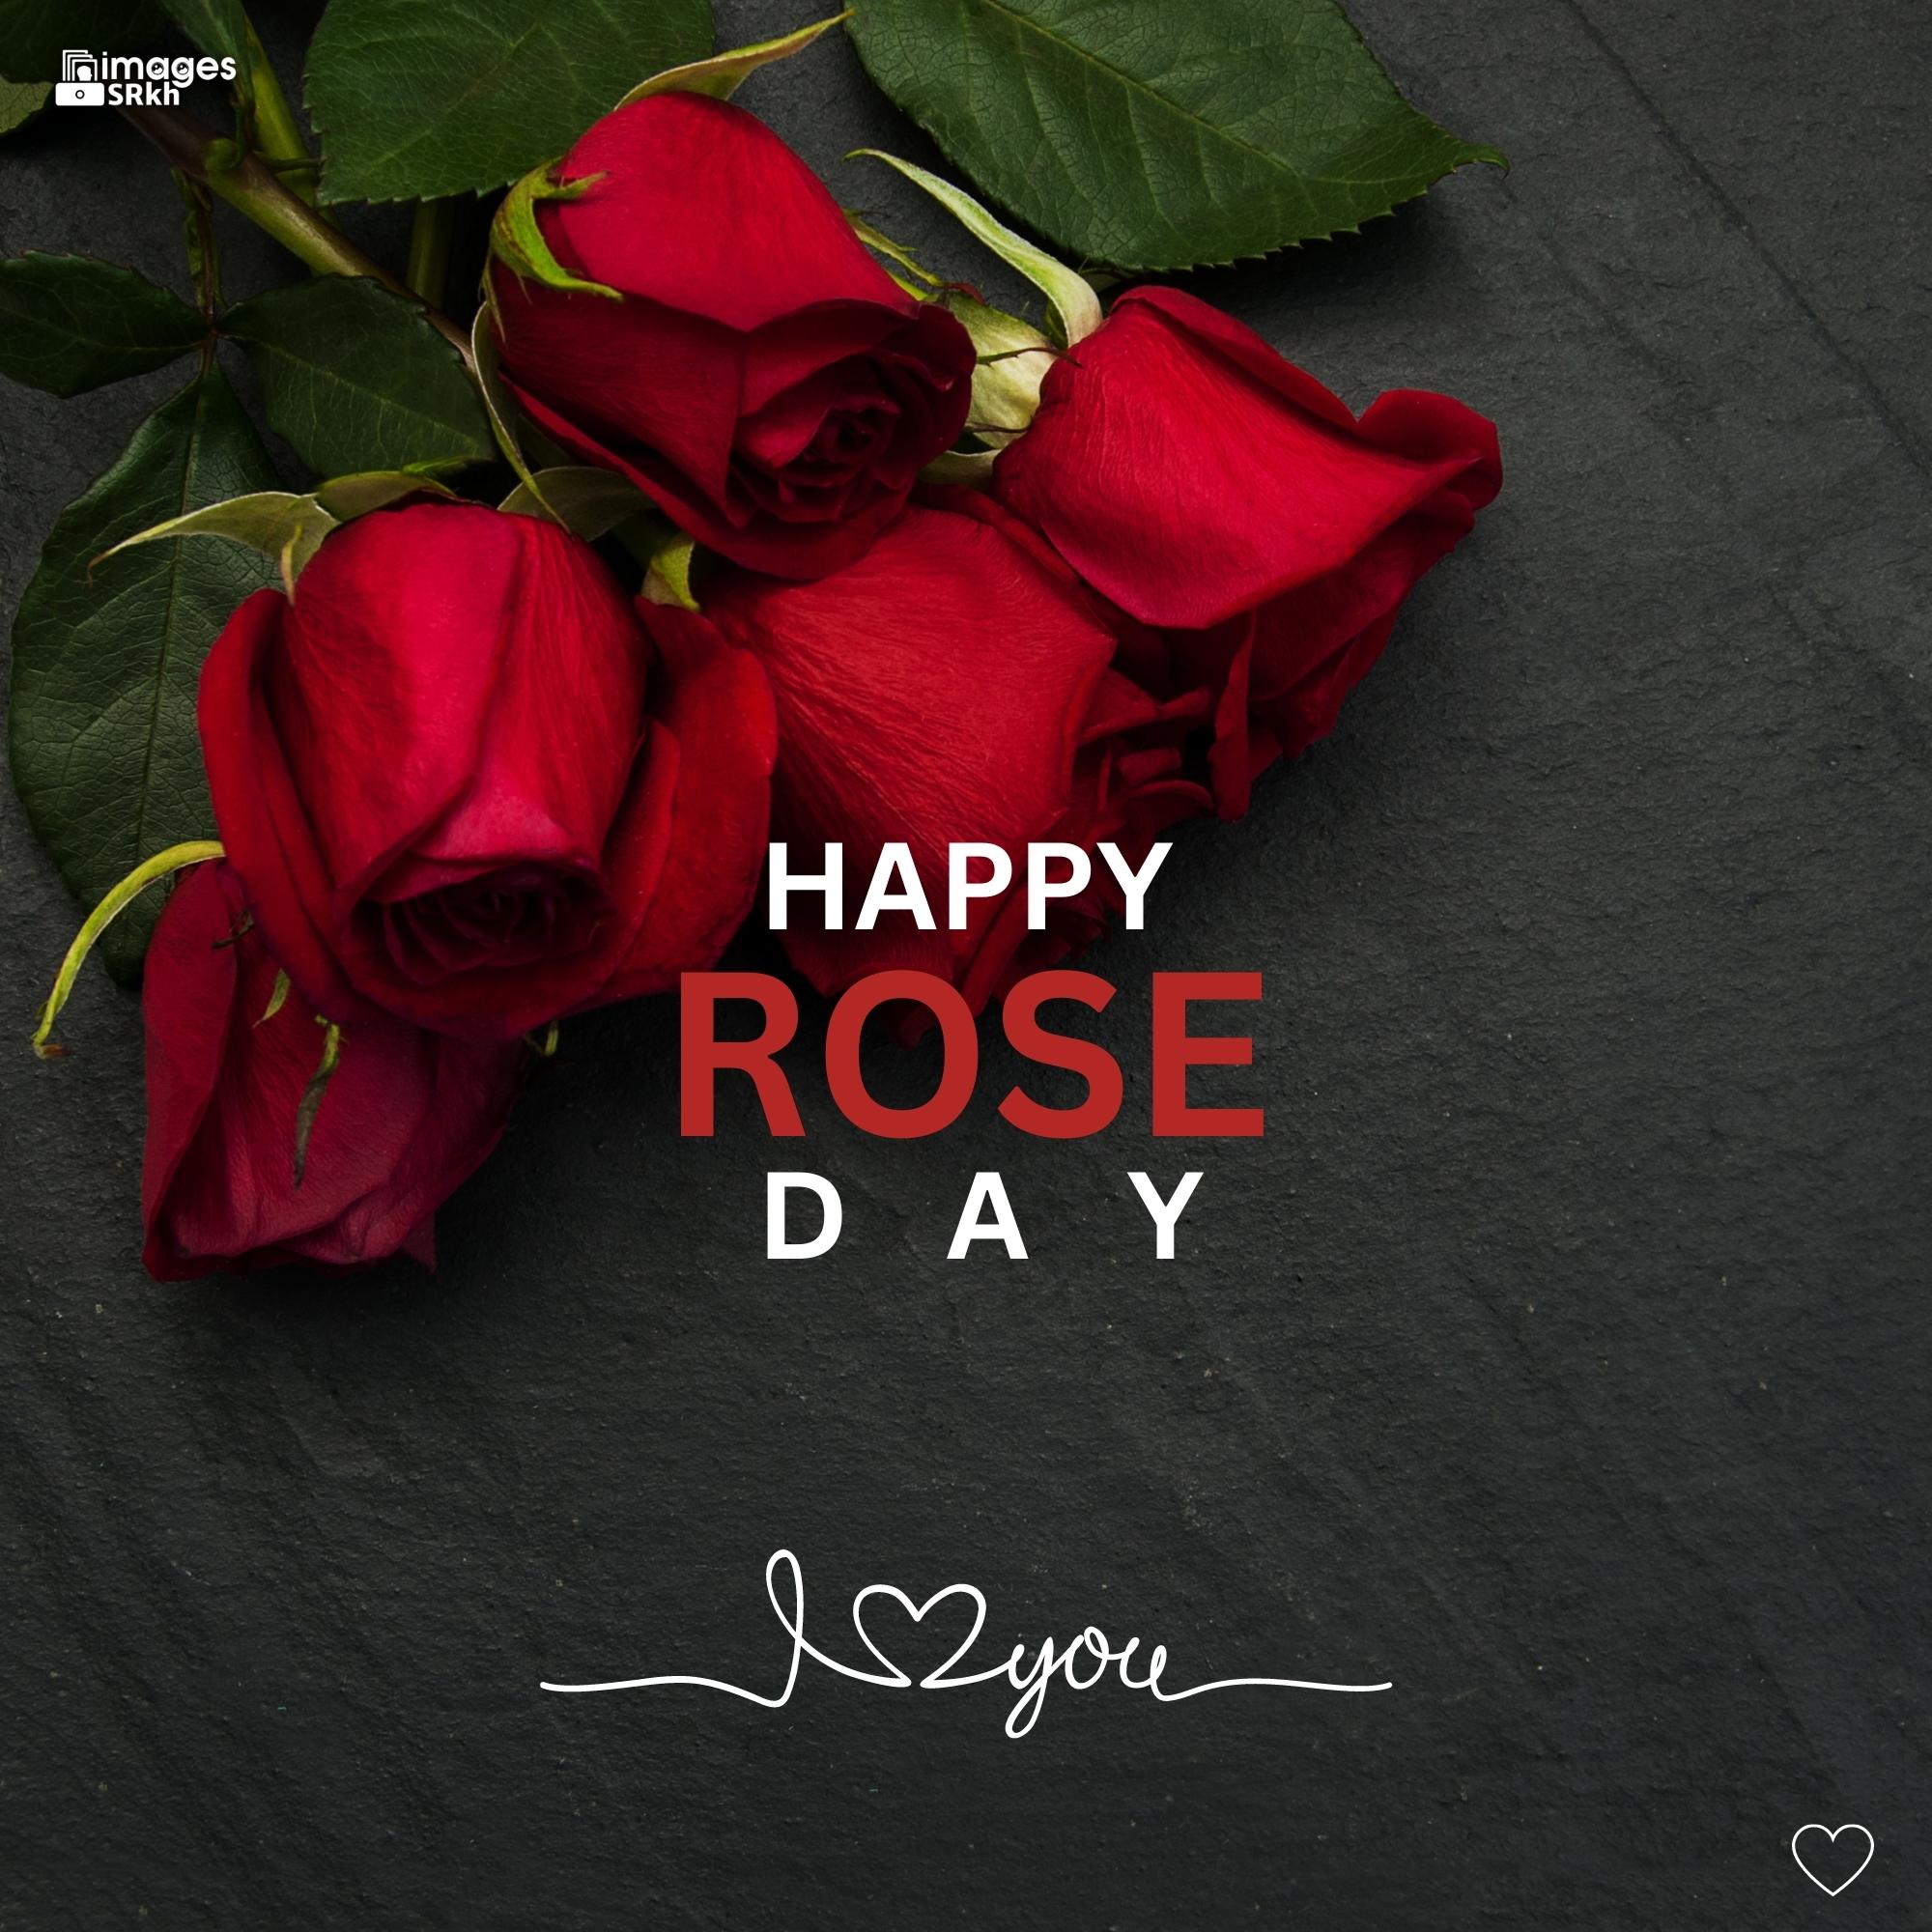 Happy Rose Day Image Hd Download (46)